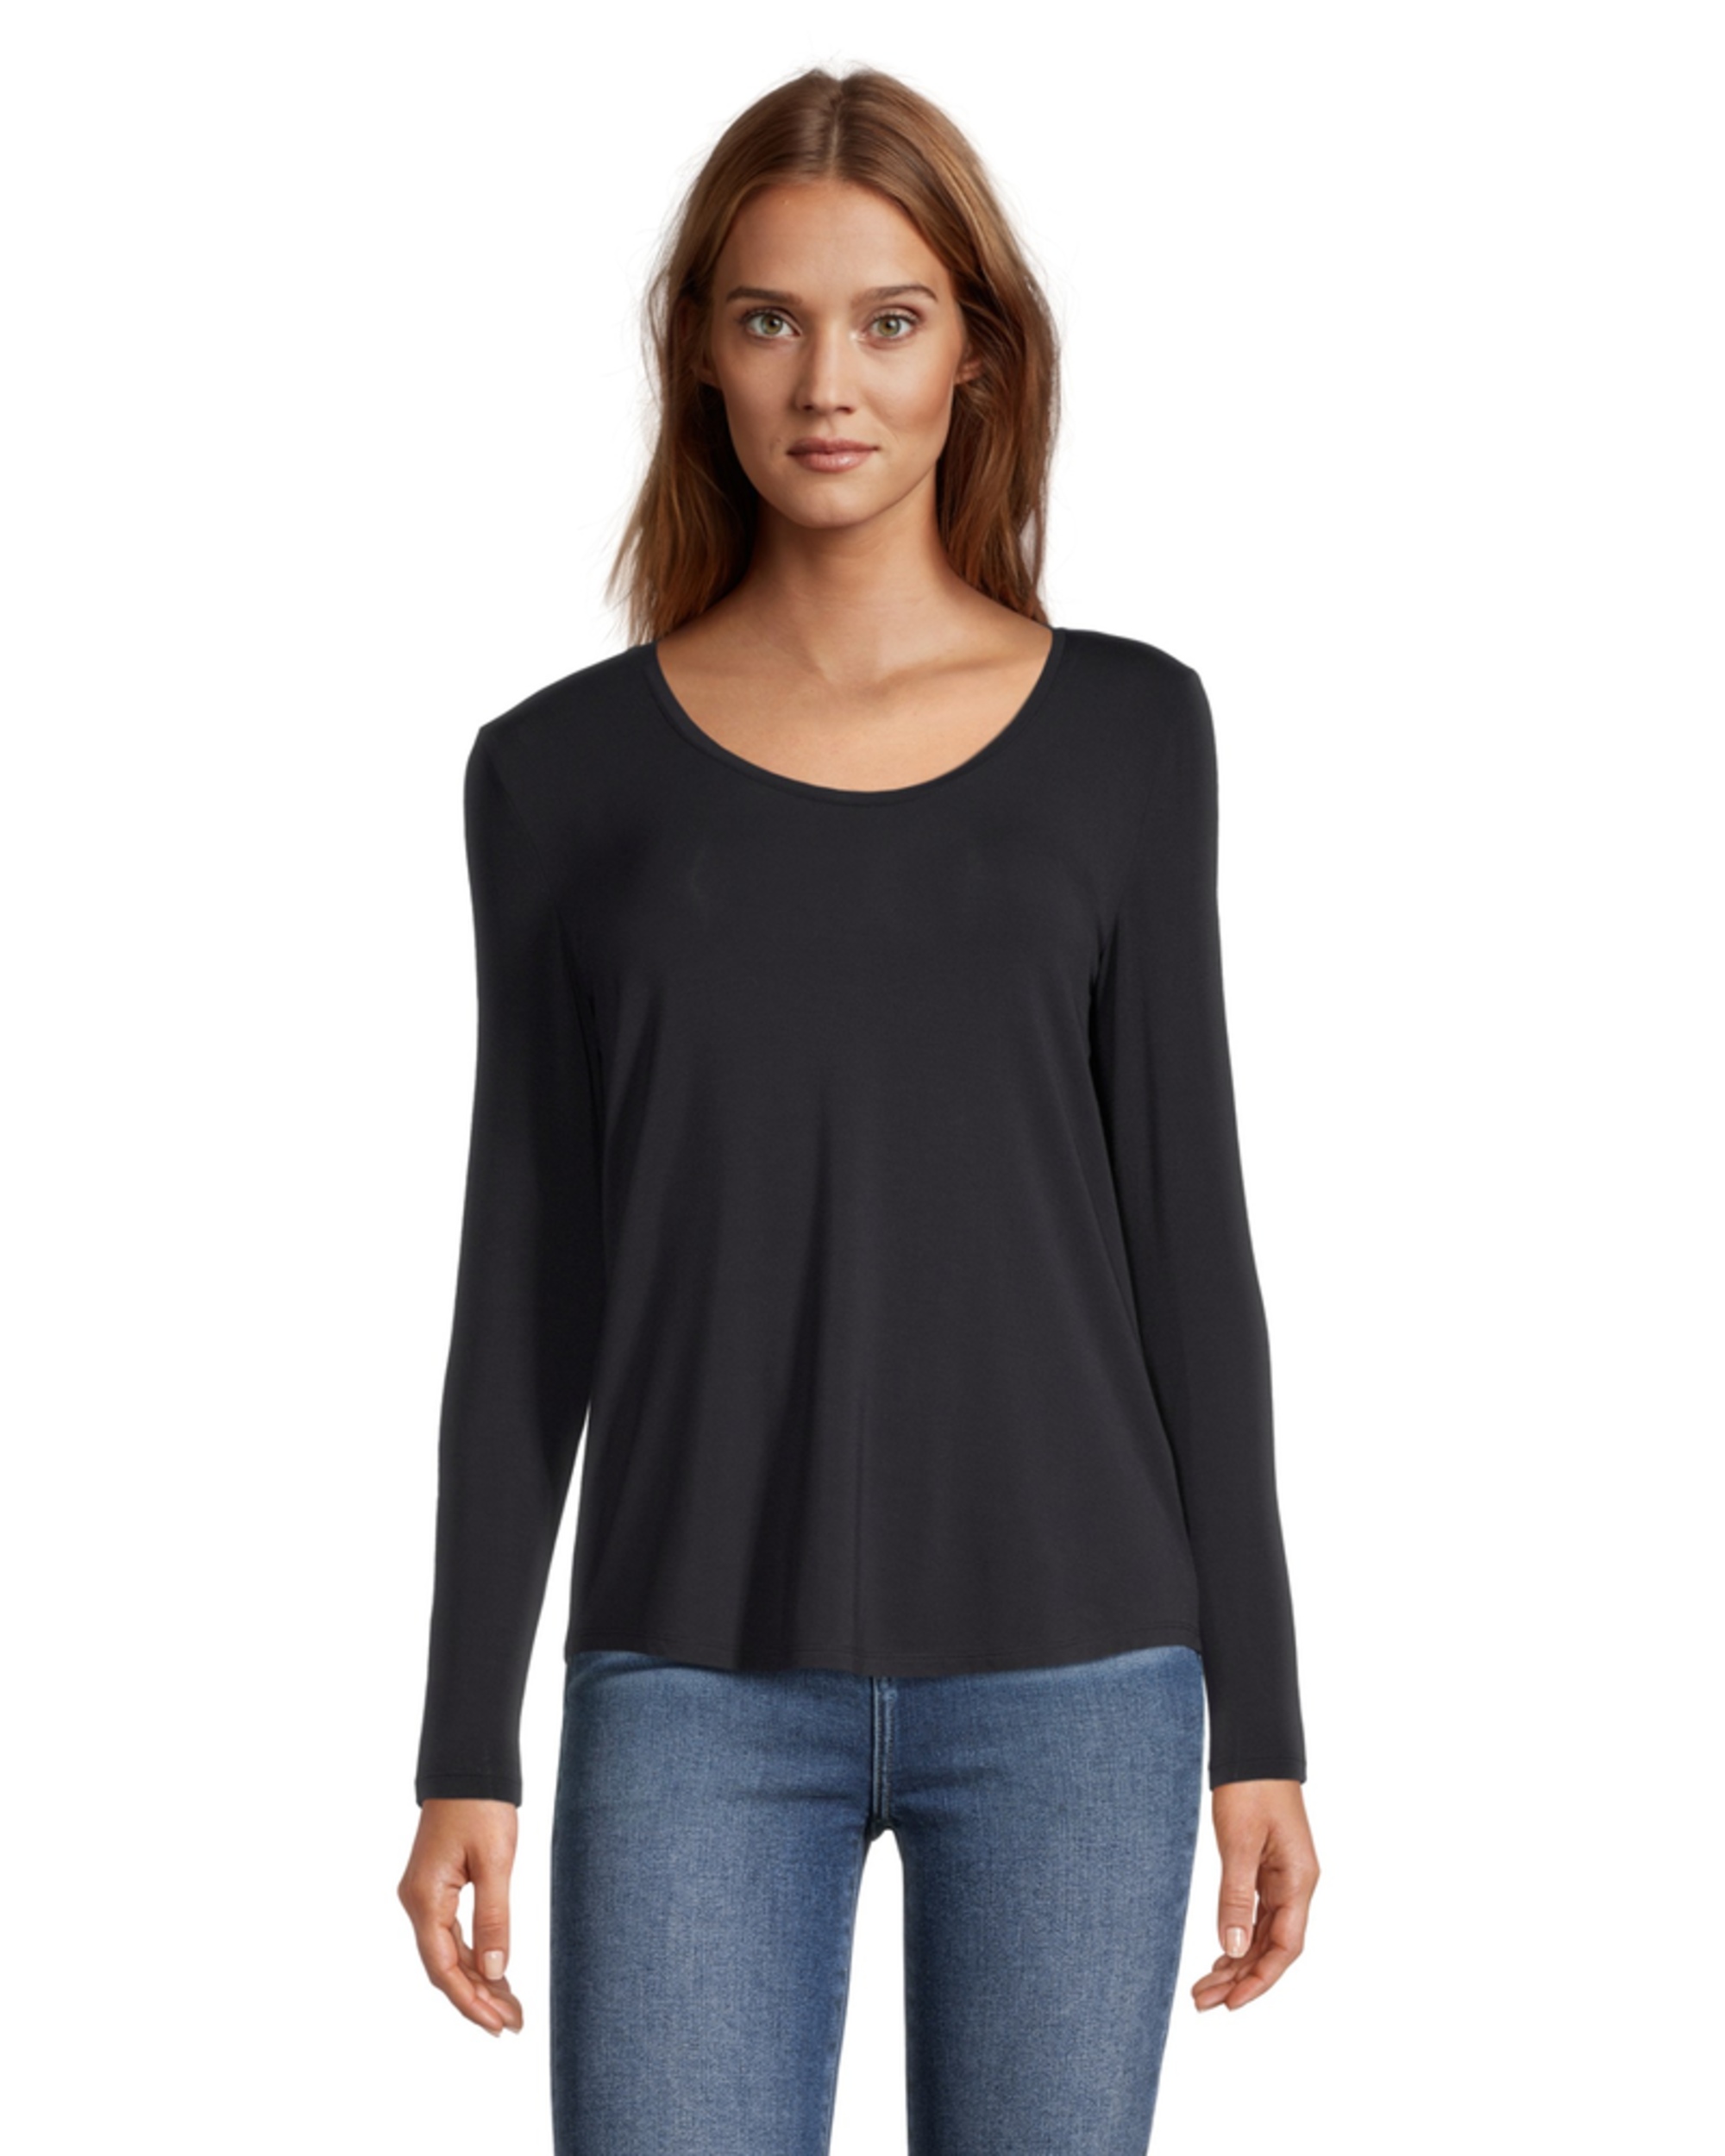 Denver Hayes Women's Long Sleeve Relaxed Fit Scoop Neck T Shirt | Marks